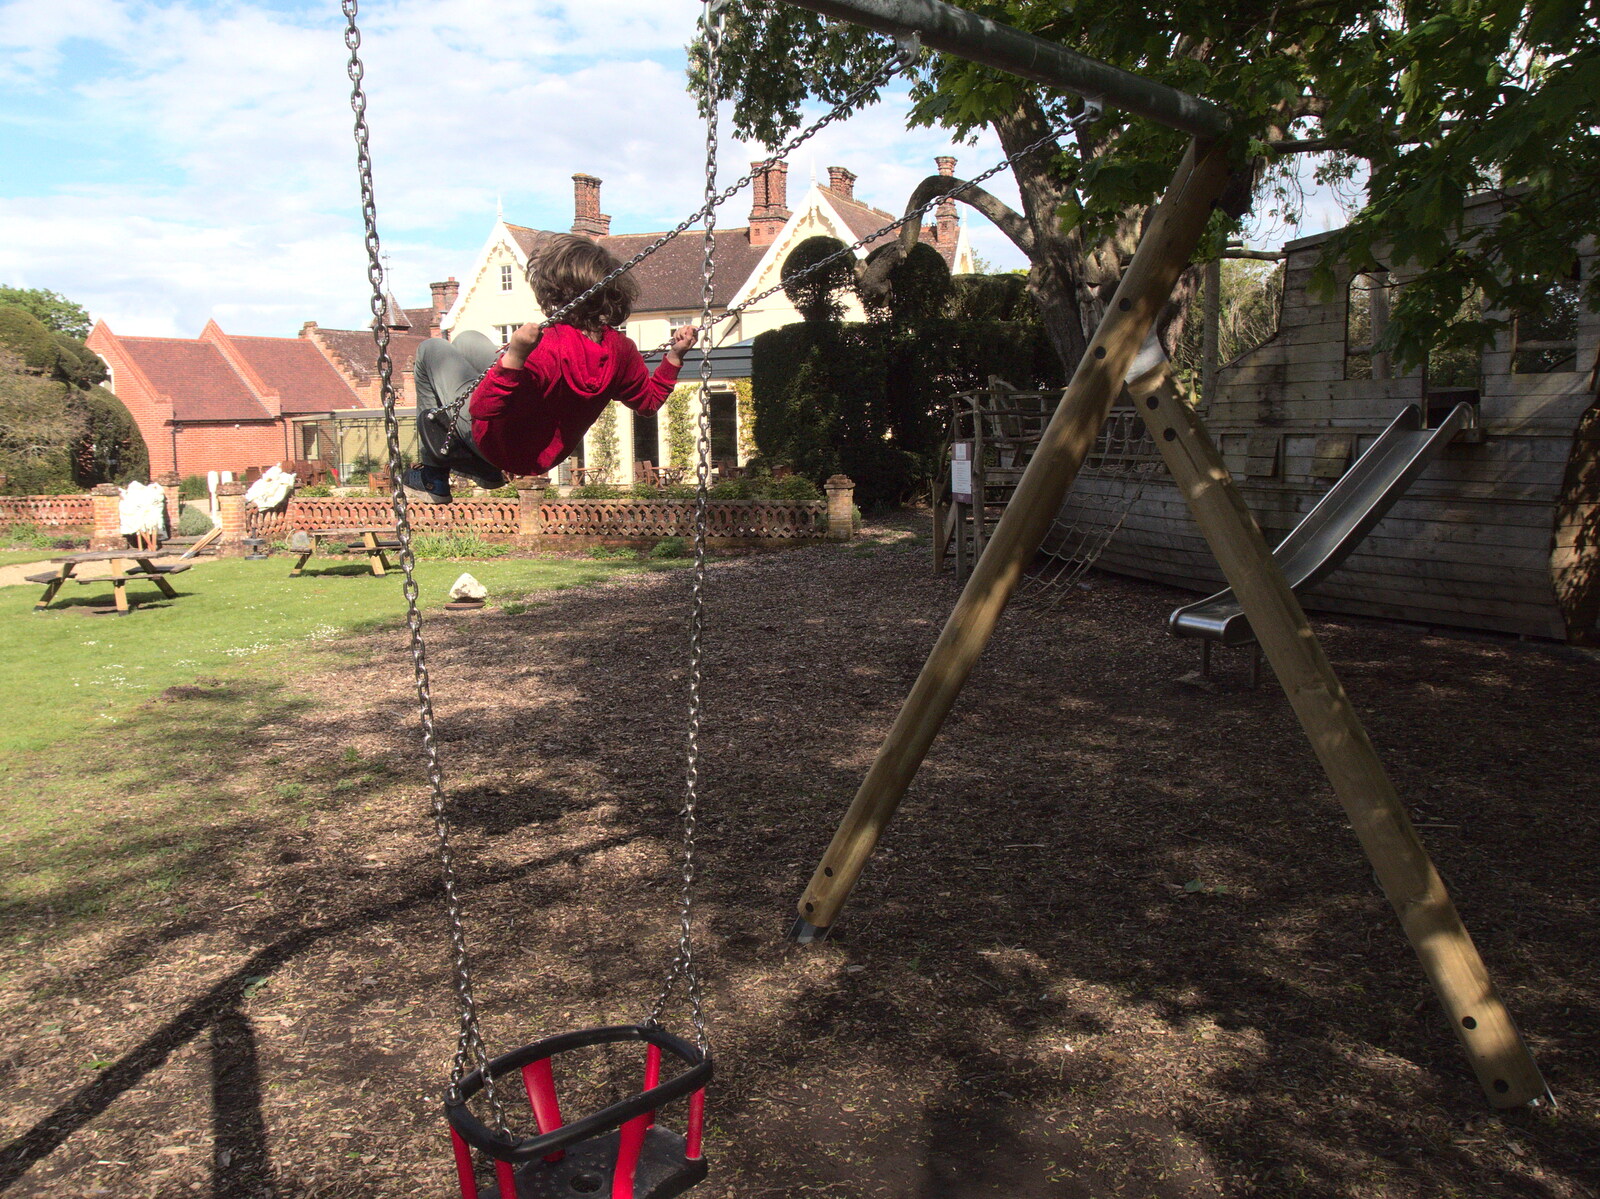 Fred on the Oaksmere swings from The BSCC at the Ampersand Tap, Sawmills Road, Diss, Norfolk - 20th May 2021